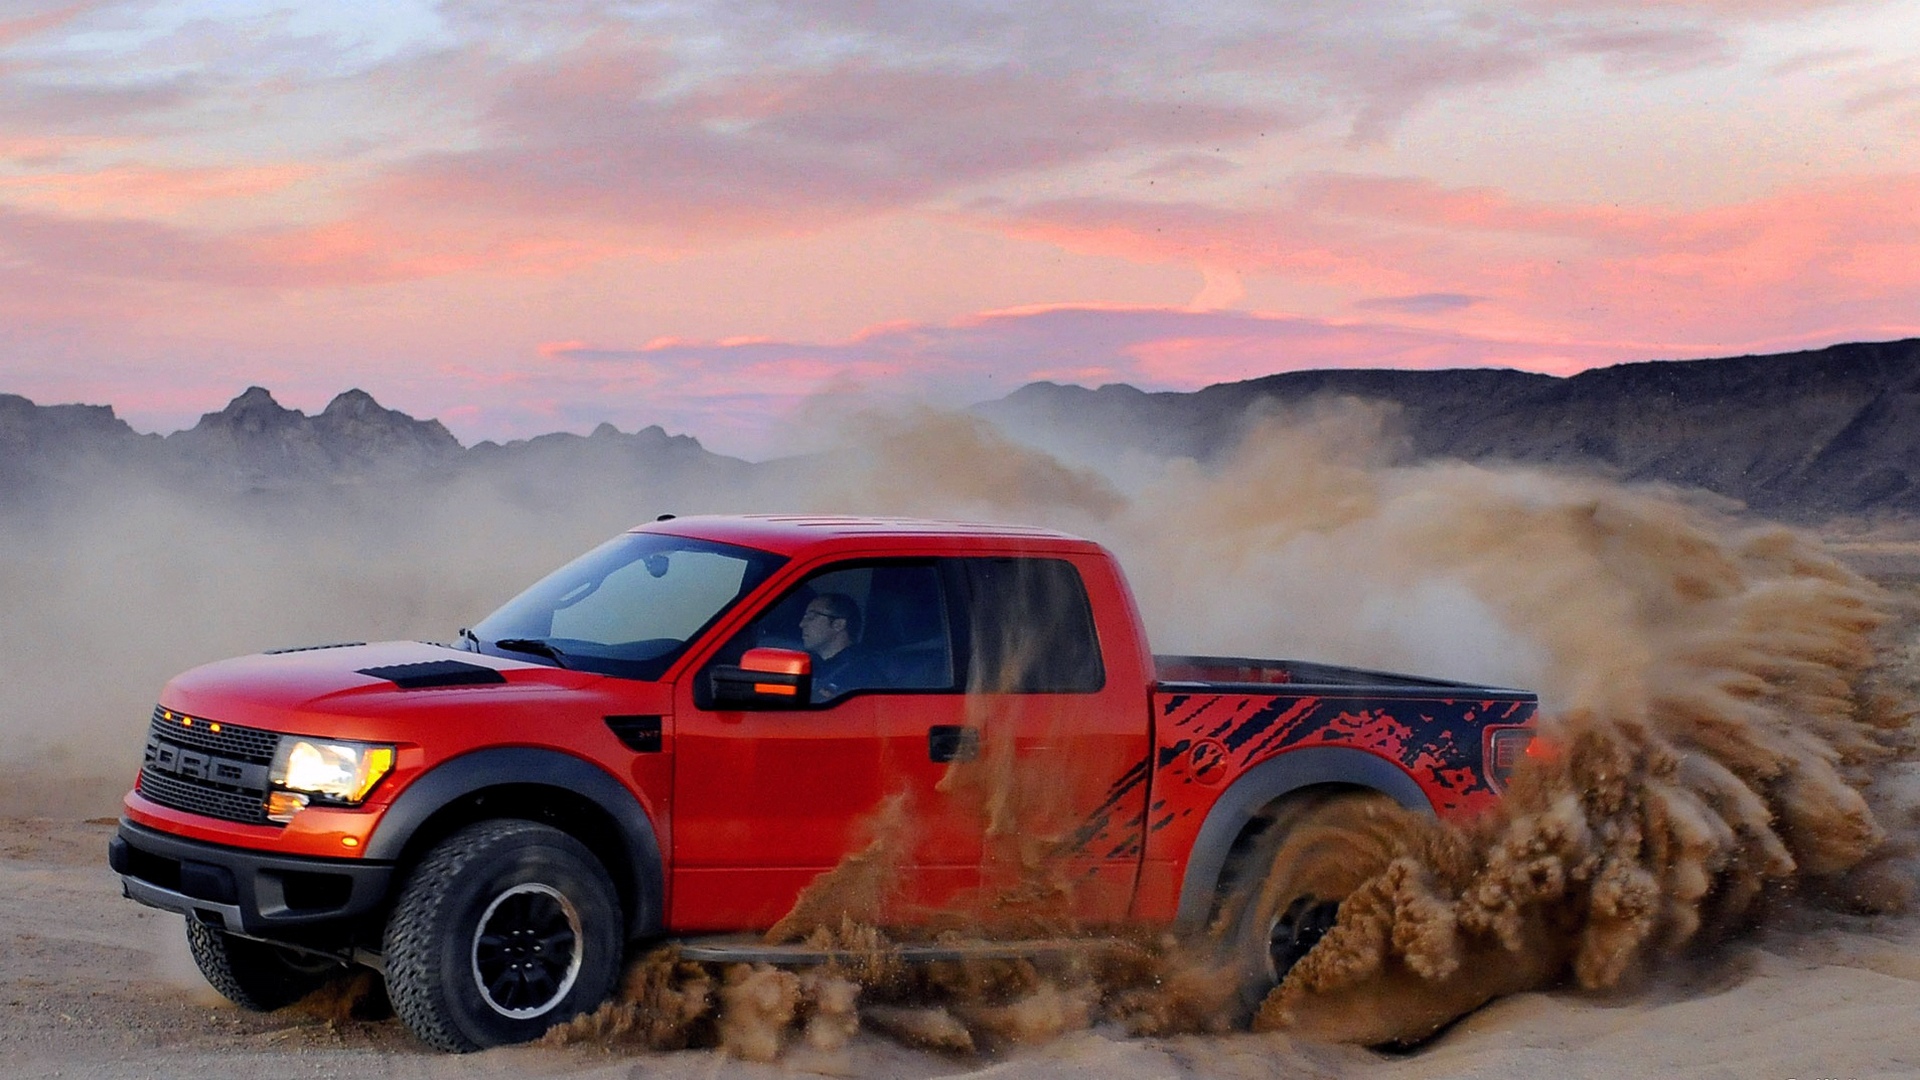 Awesome Orange Raptor Ford Trucks Wallpapers